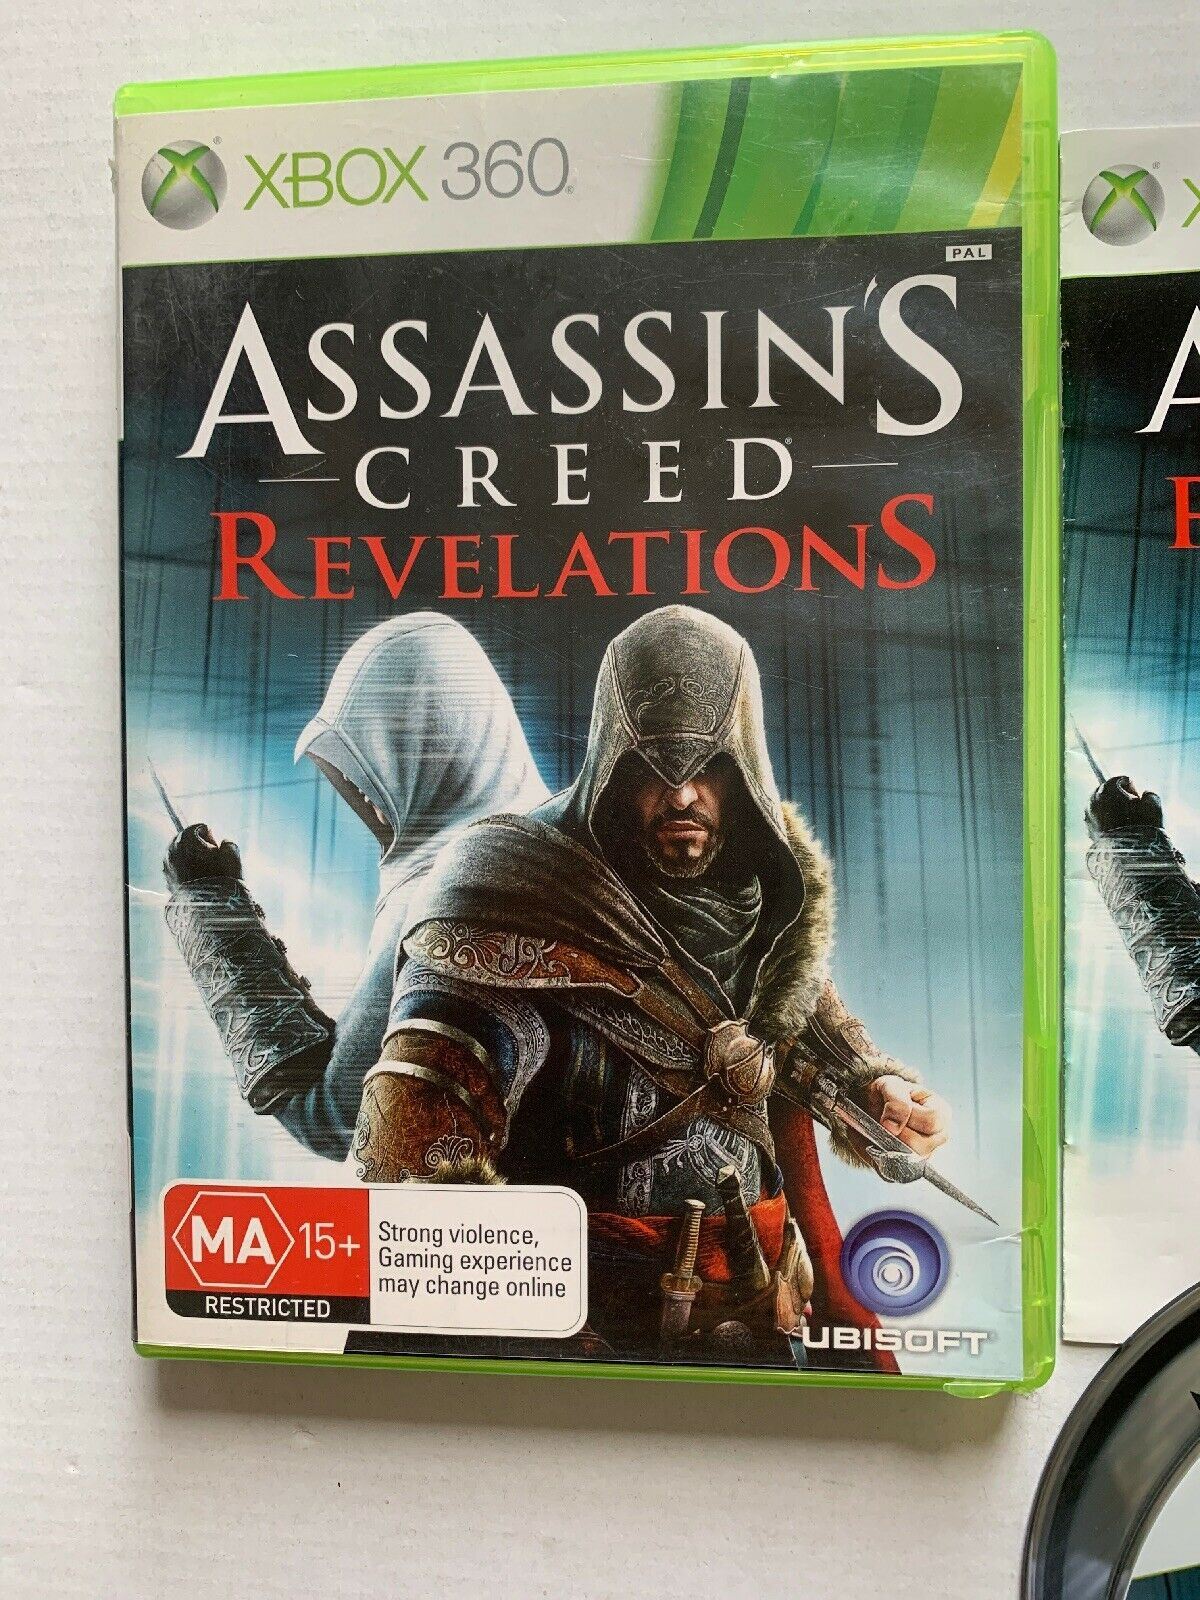 Assassin's Creed, Assassin's Creed Revelations And CD Soundtrack Xbox 360 Manual